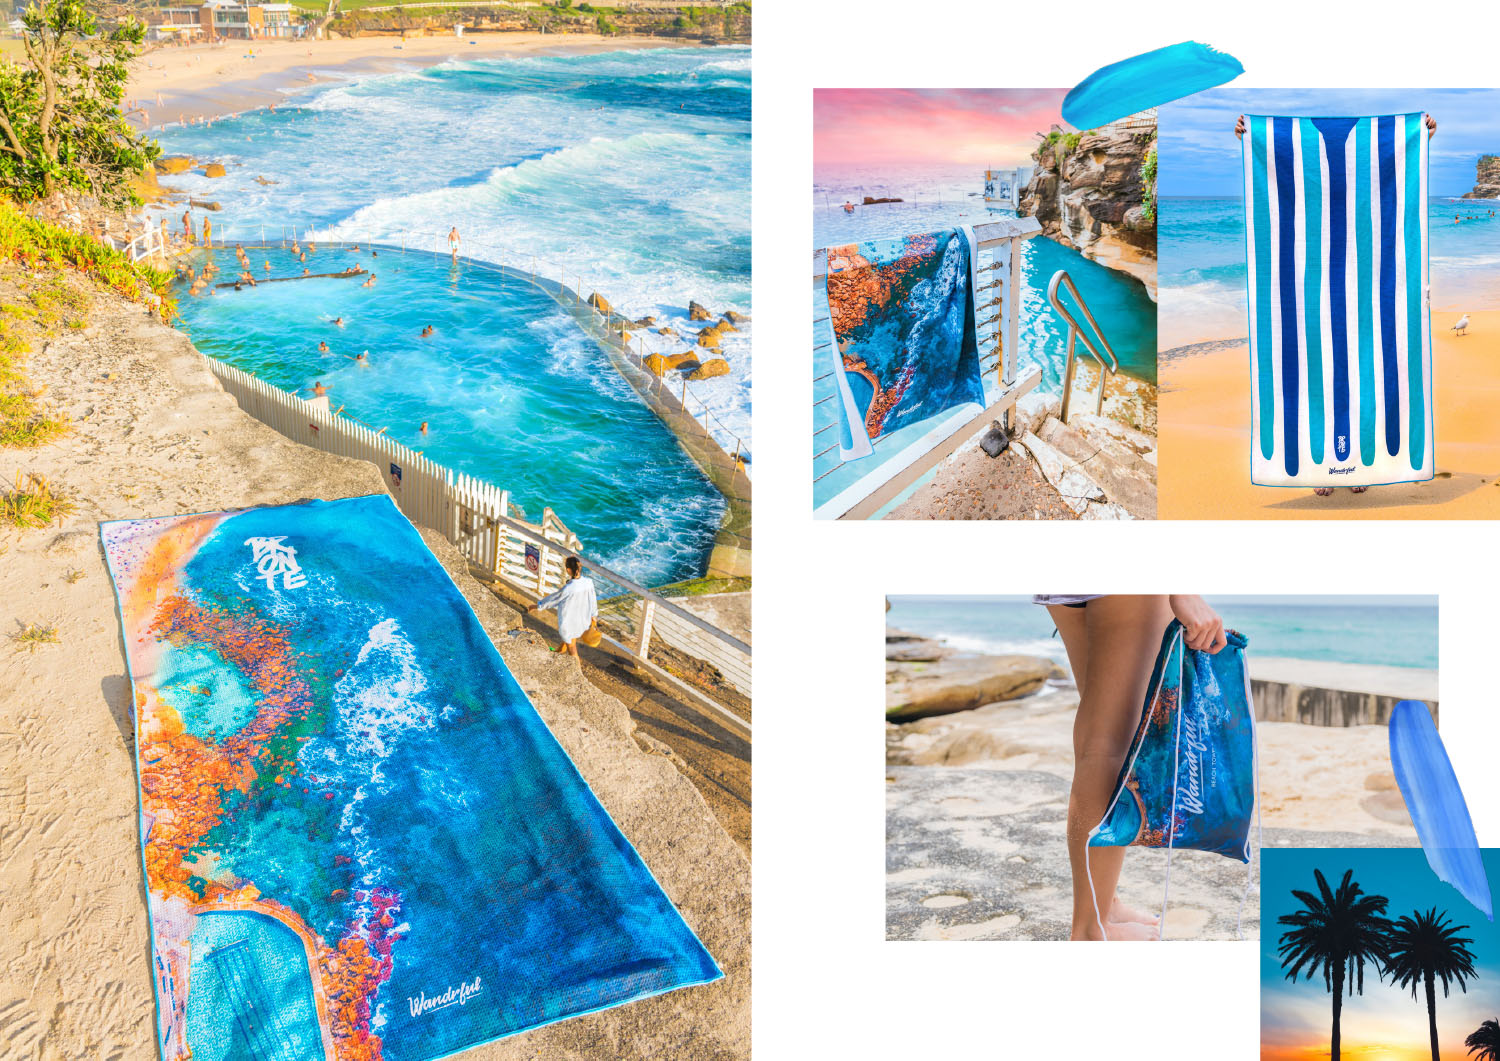 Wandrful sand-free beach towels at Bronte Beach. Model using sand-free beach towel.